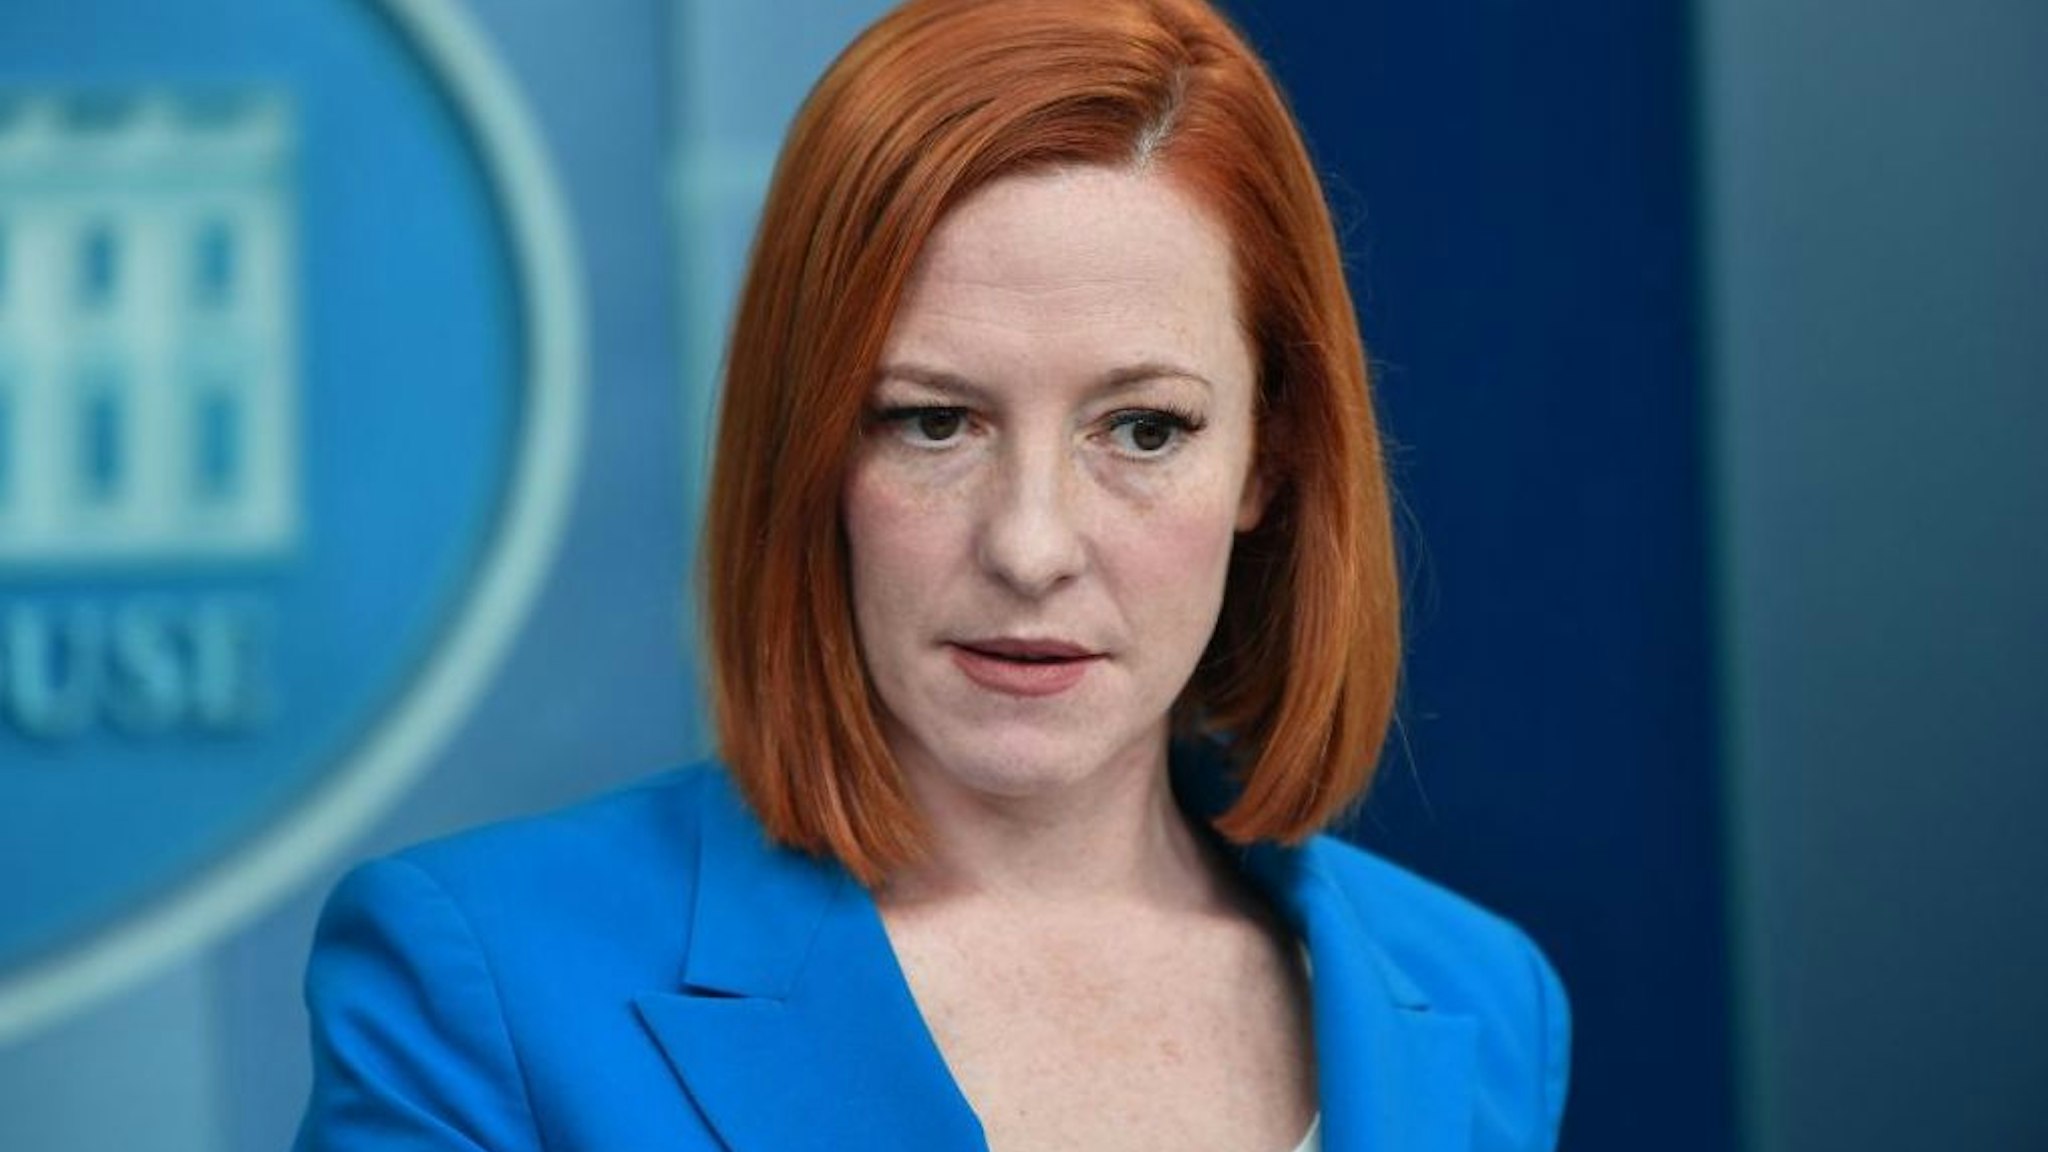 White House press secretary Jen Psaki speaks during a briefing in the James S. Brady Press Briefing Room of the White House in Washington, DC, on March 21, 2022.